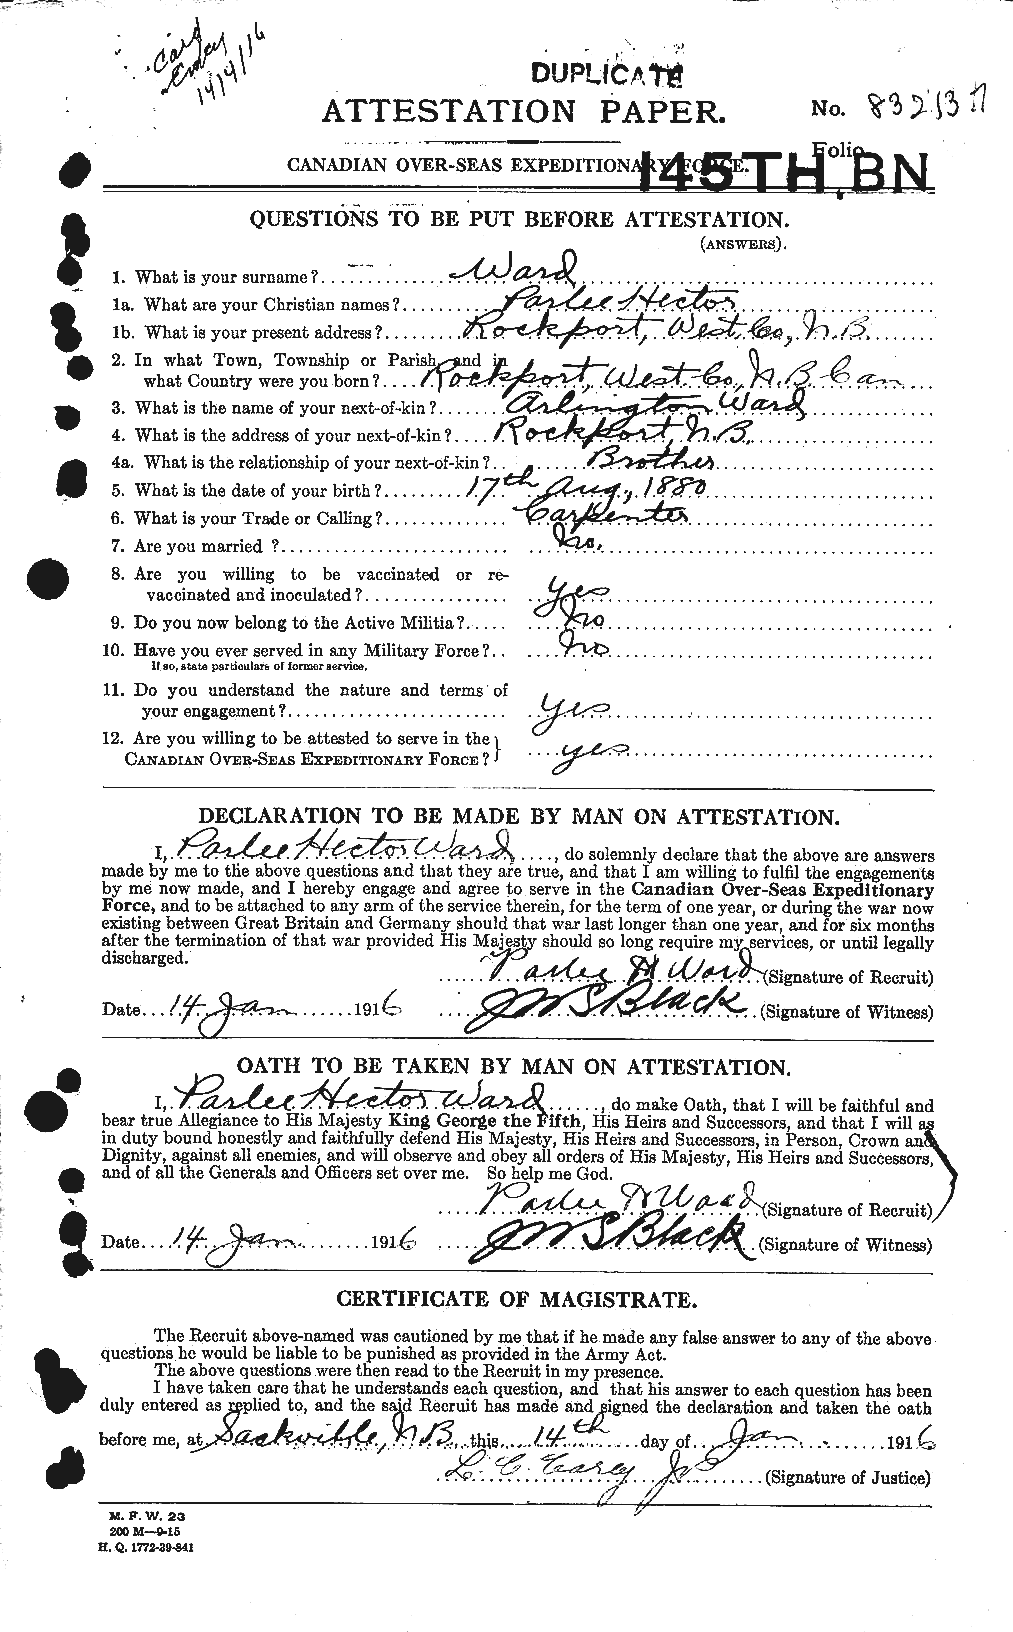 Personnel Records of the First World War - CEF 659619a